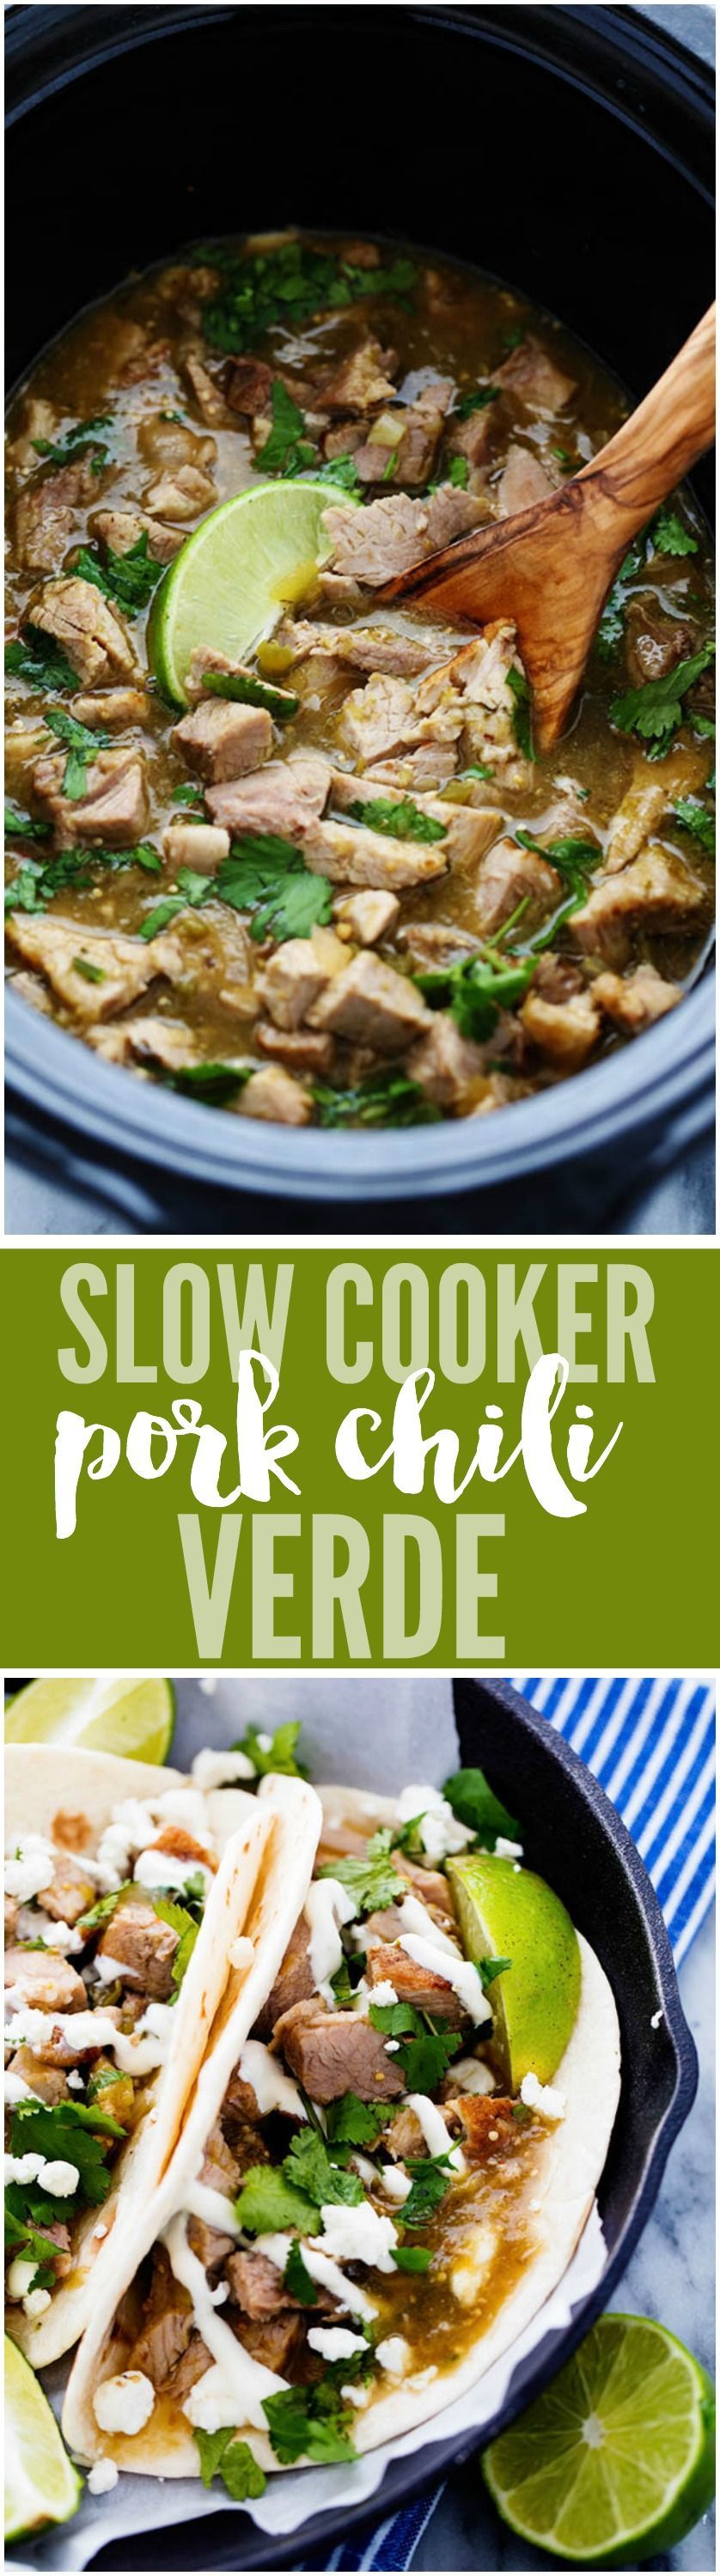 This is easily the BEST chili verde that I have EVER had! The pork is tender and full of amazing flavor and is made right in the